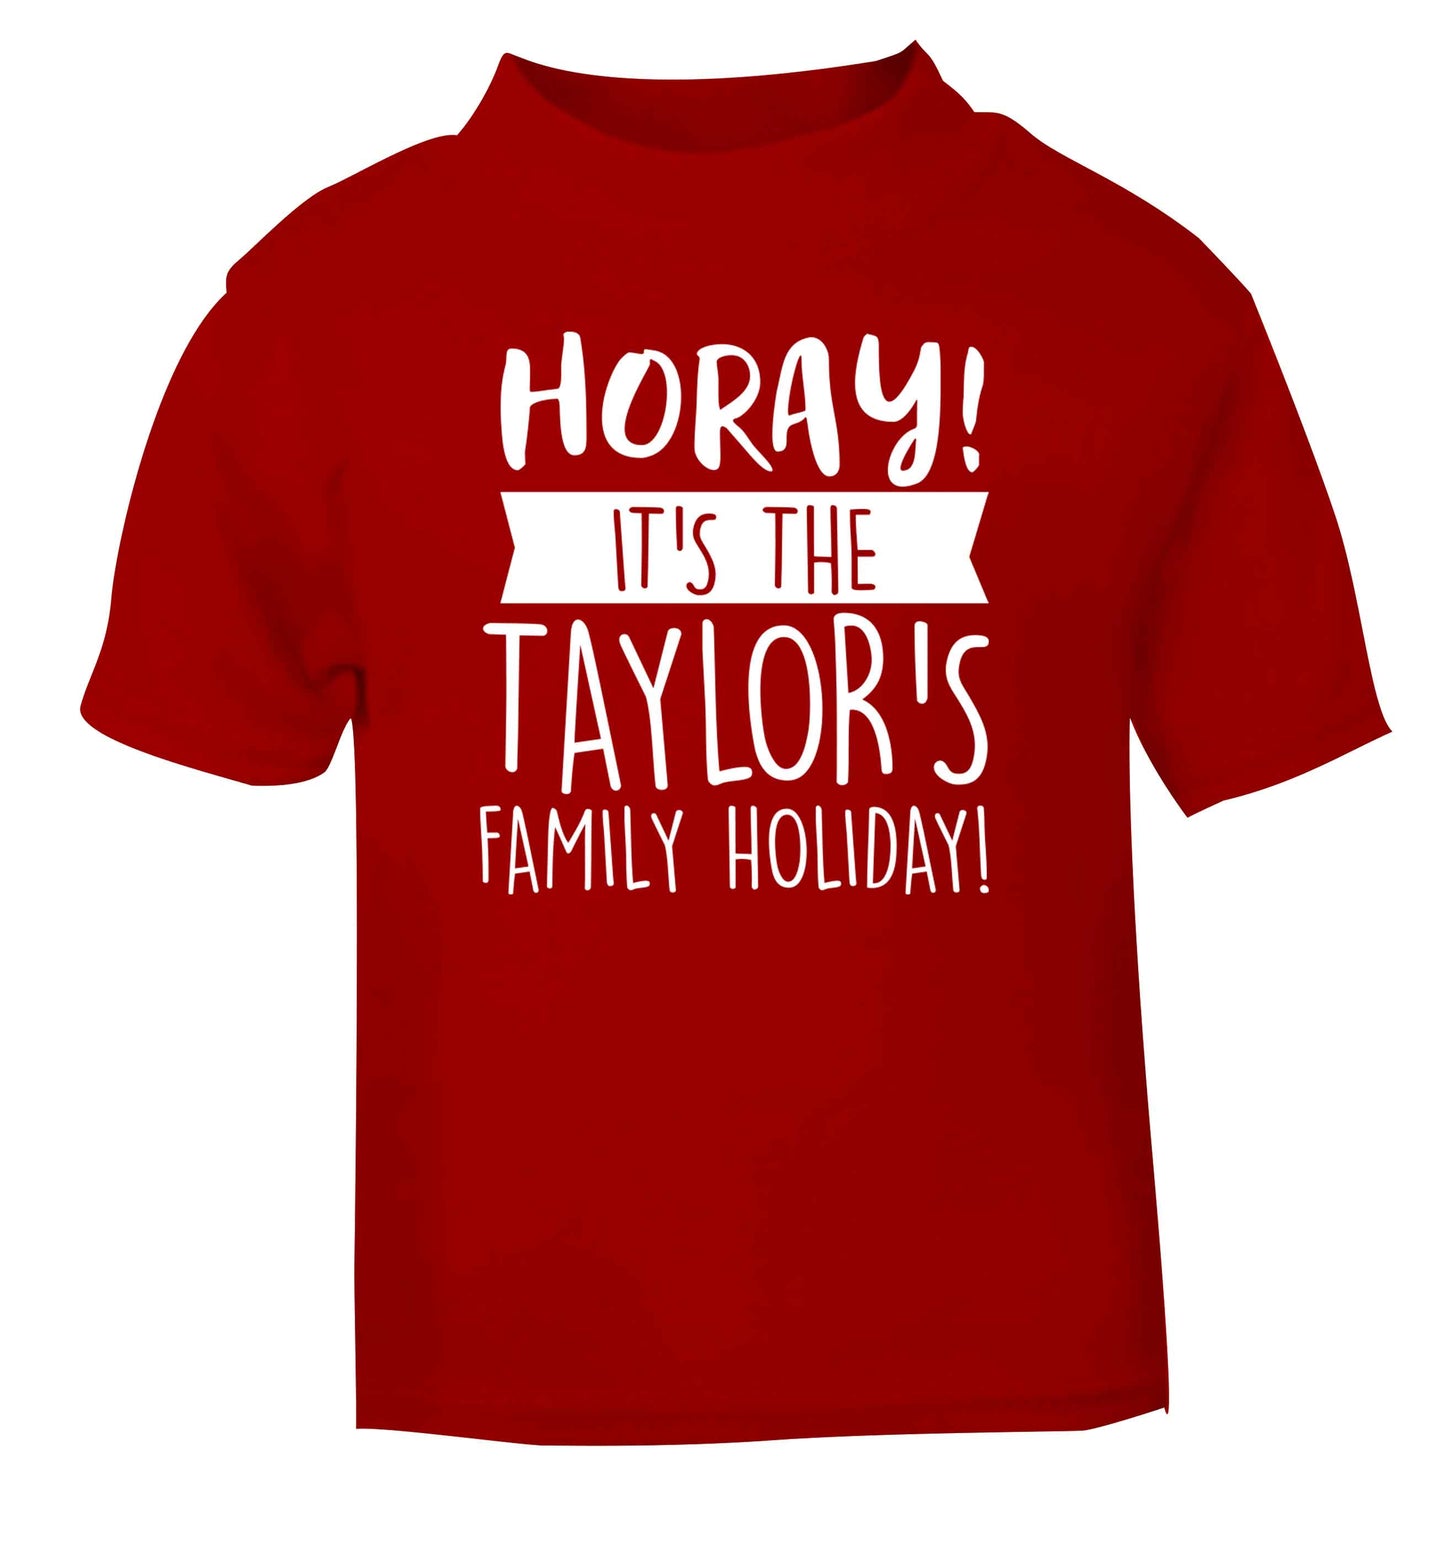 Horay it's the Taylor's family holiday! personalised item red Baby Toddler Tshirt 2 Years